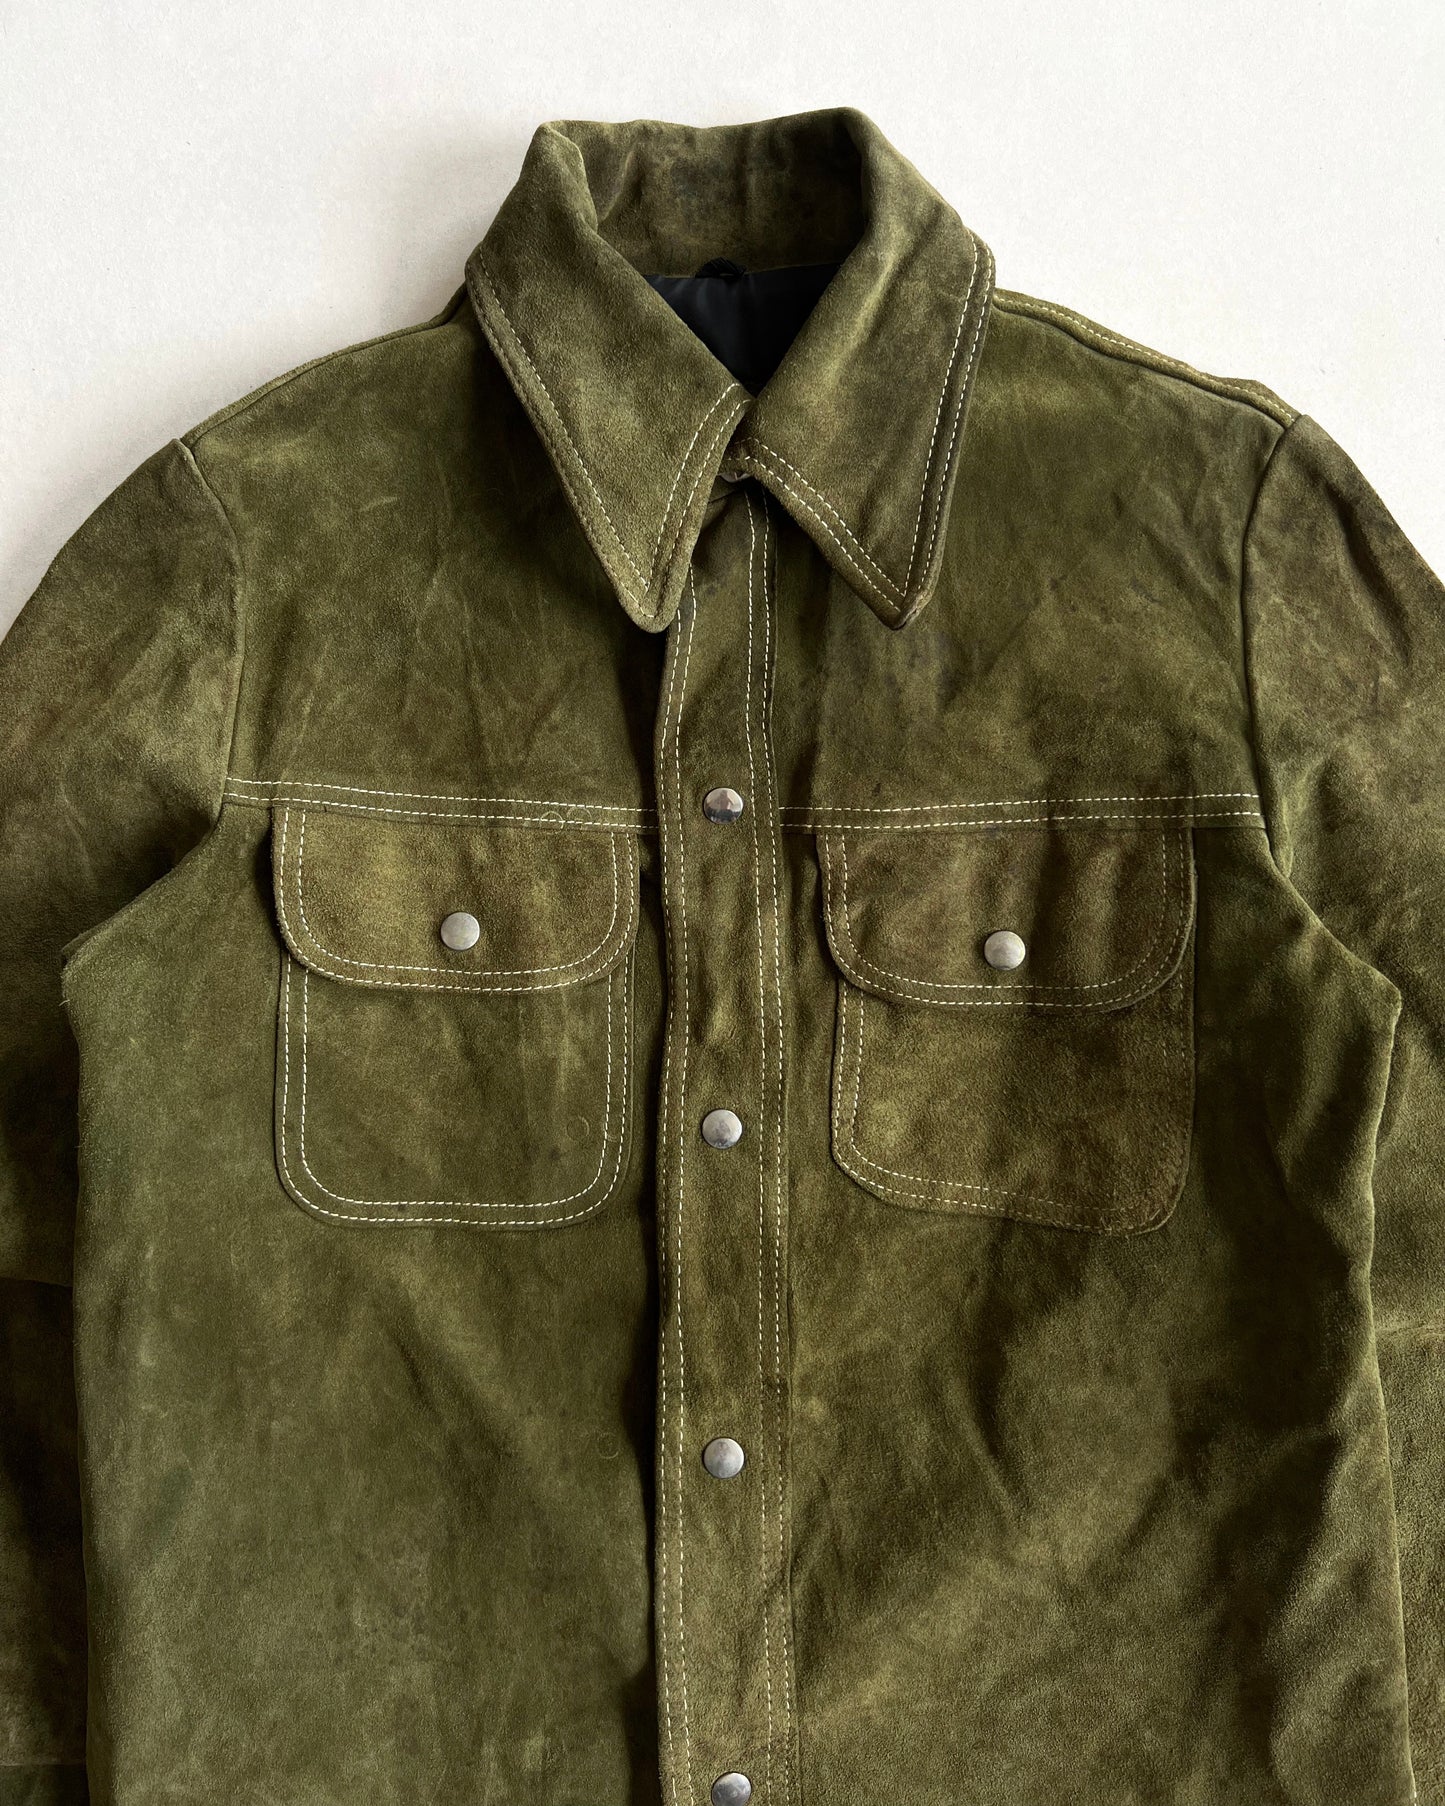 1970S SEARS ROEBUCK SUEDE LEATHER SHIRT (M)